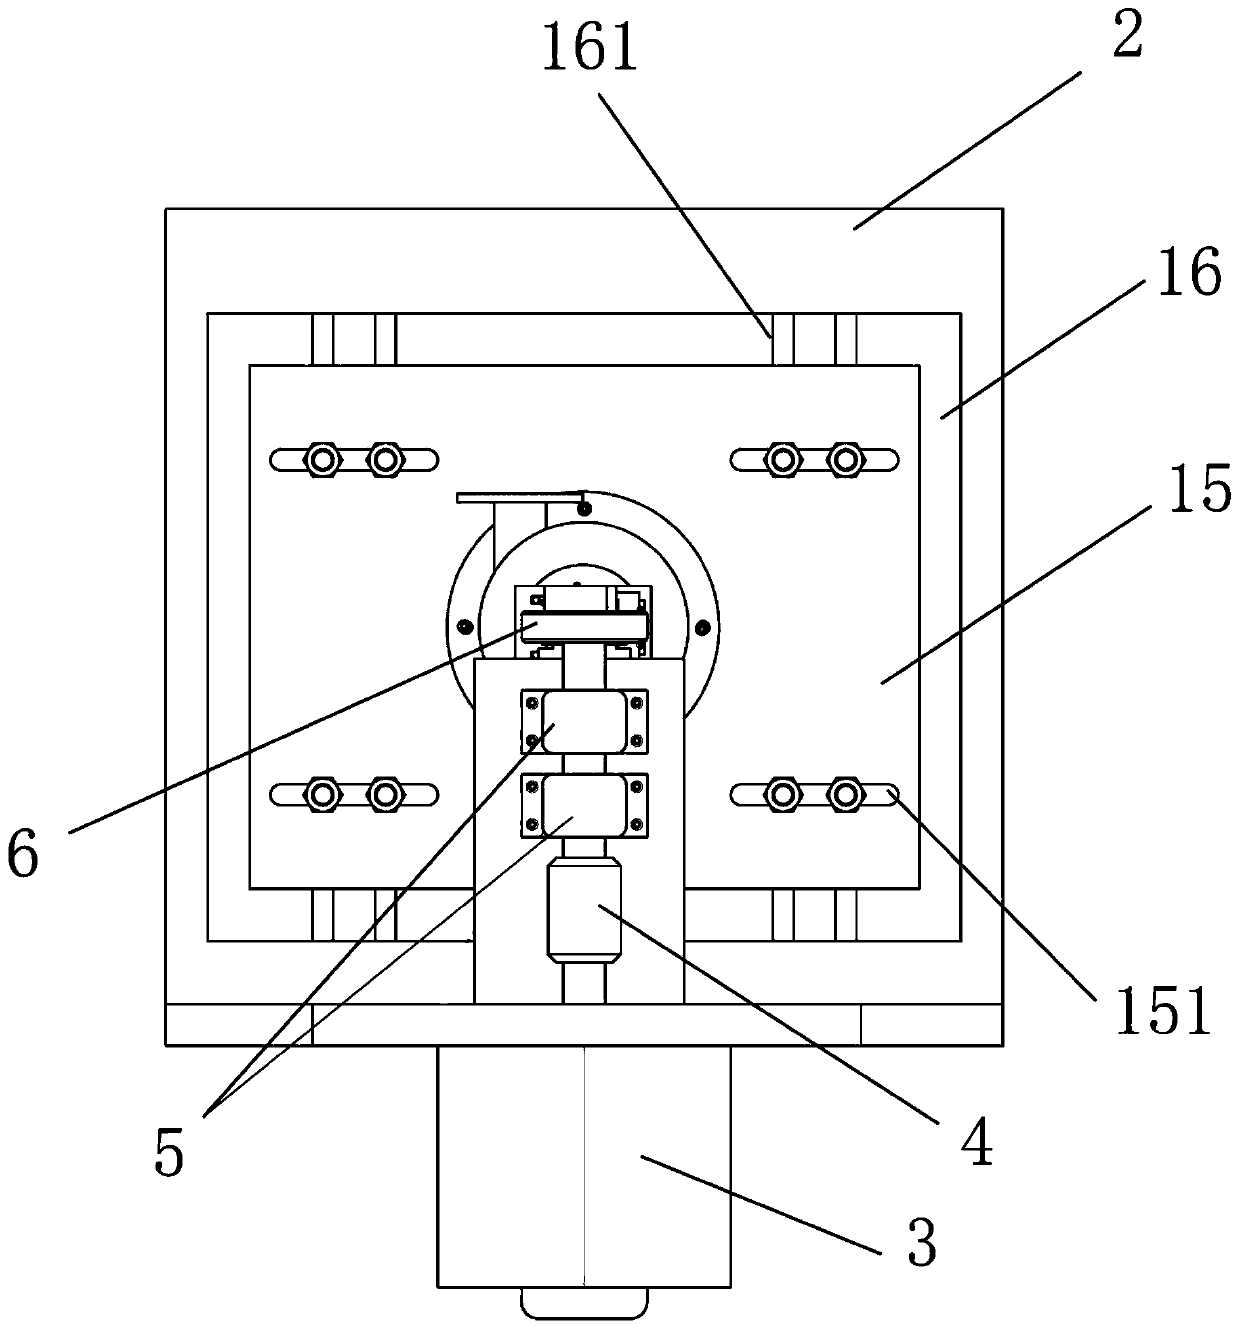 Multi-mode frictional wear test device and method